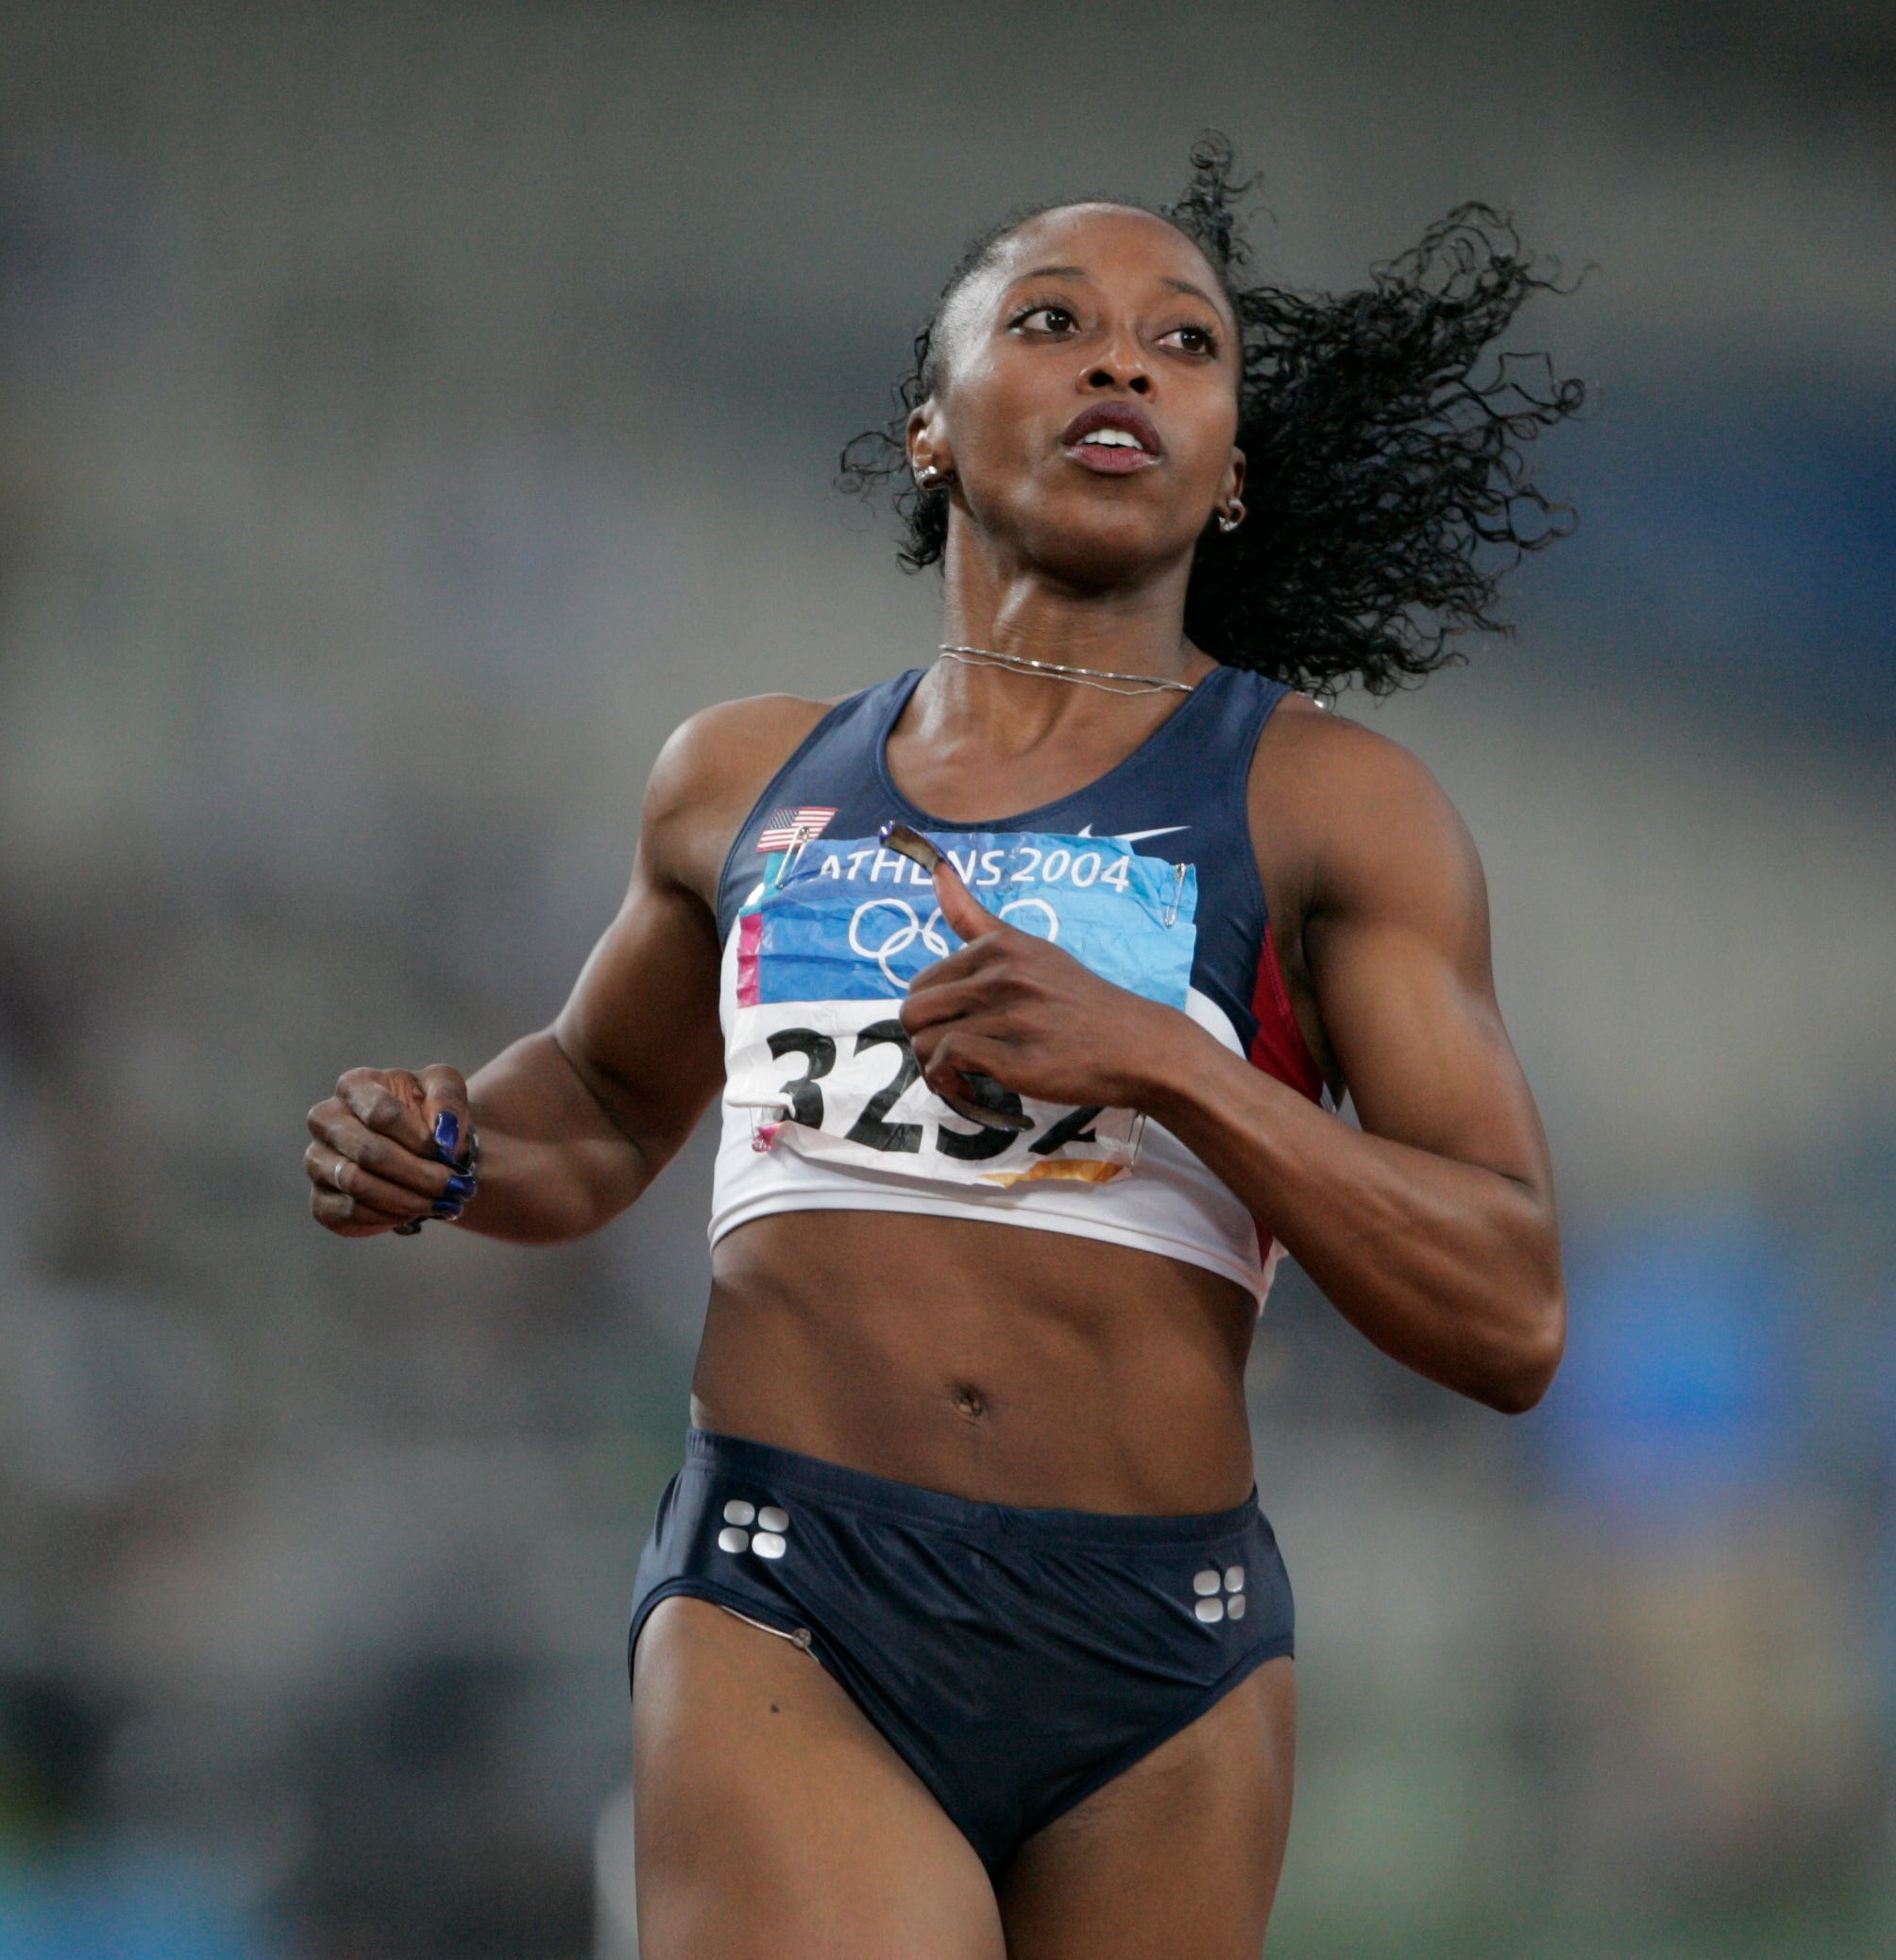 Top 8 Greatest Female Sprinters of All Time Women Athletes who have